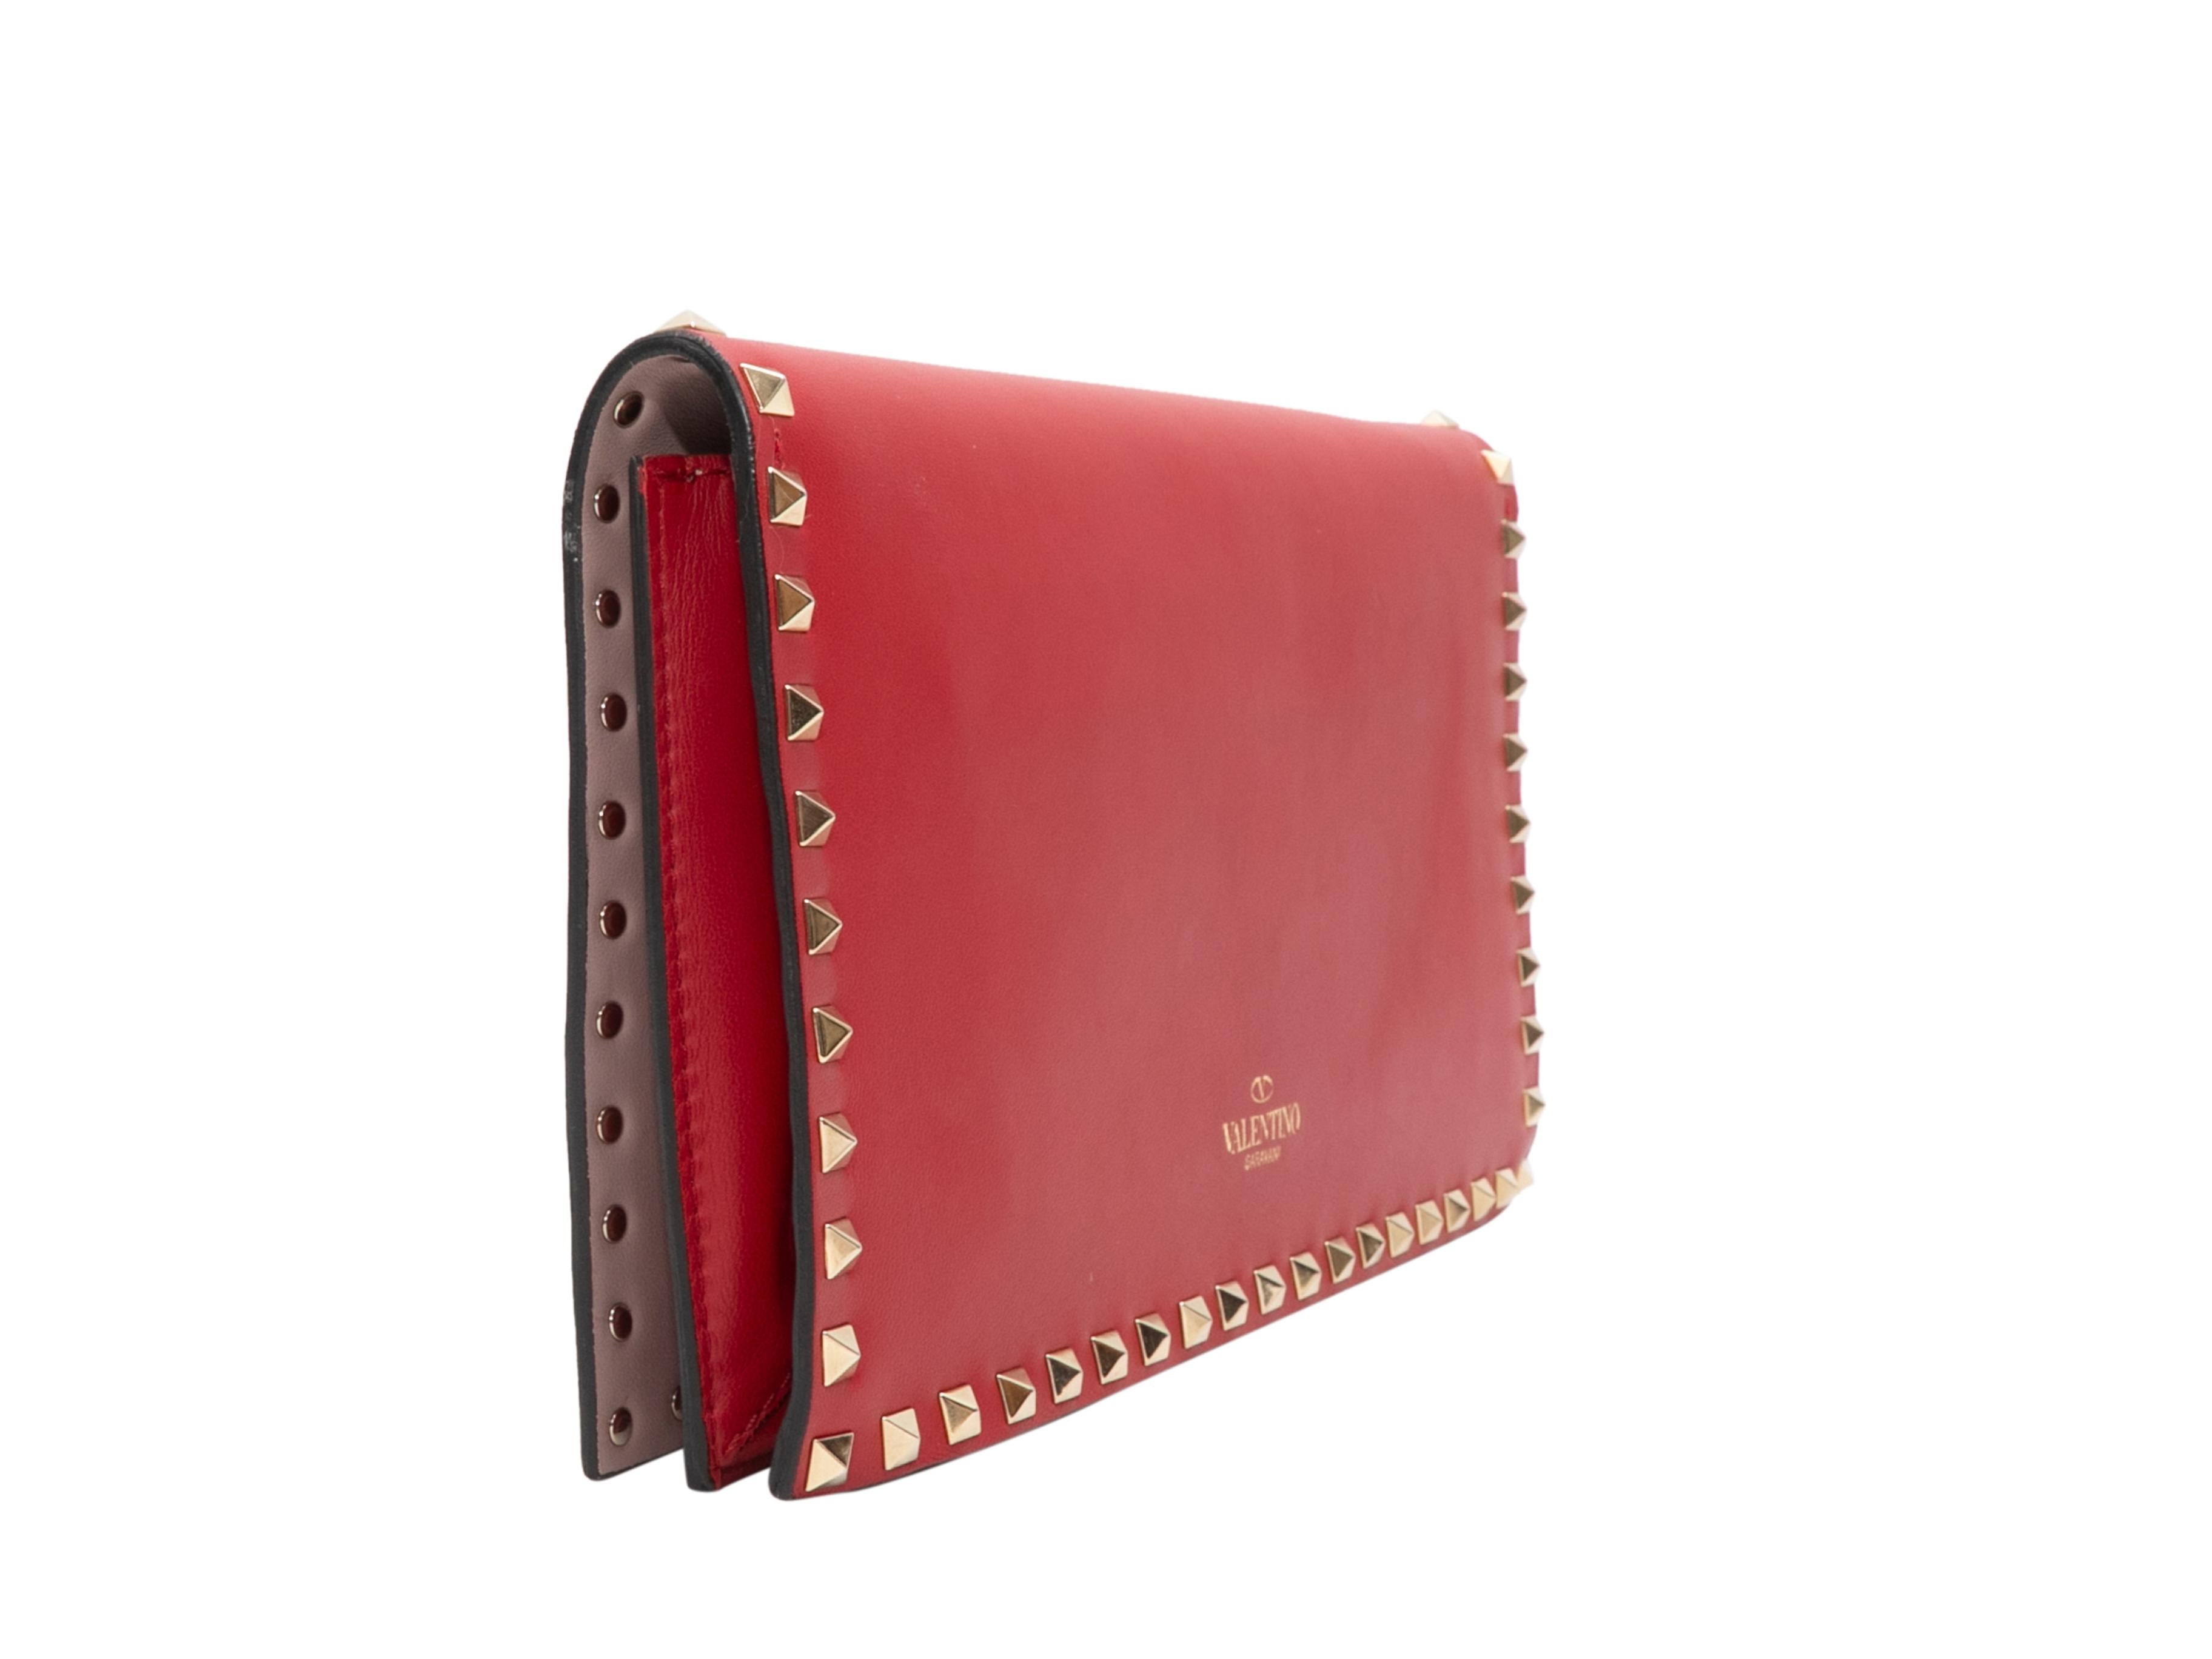 Red Valentino Rockstud Clutch For Sale 1